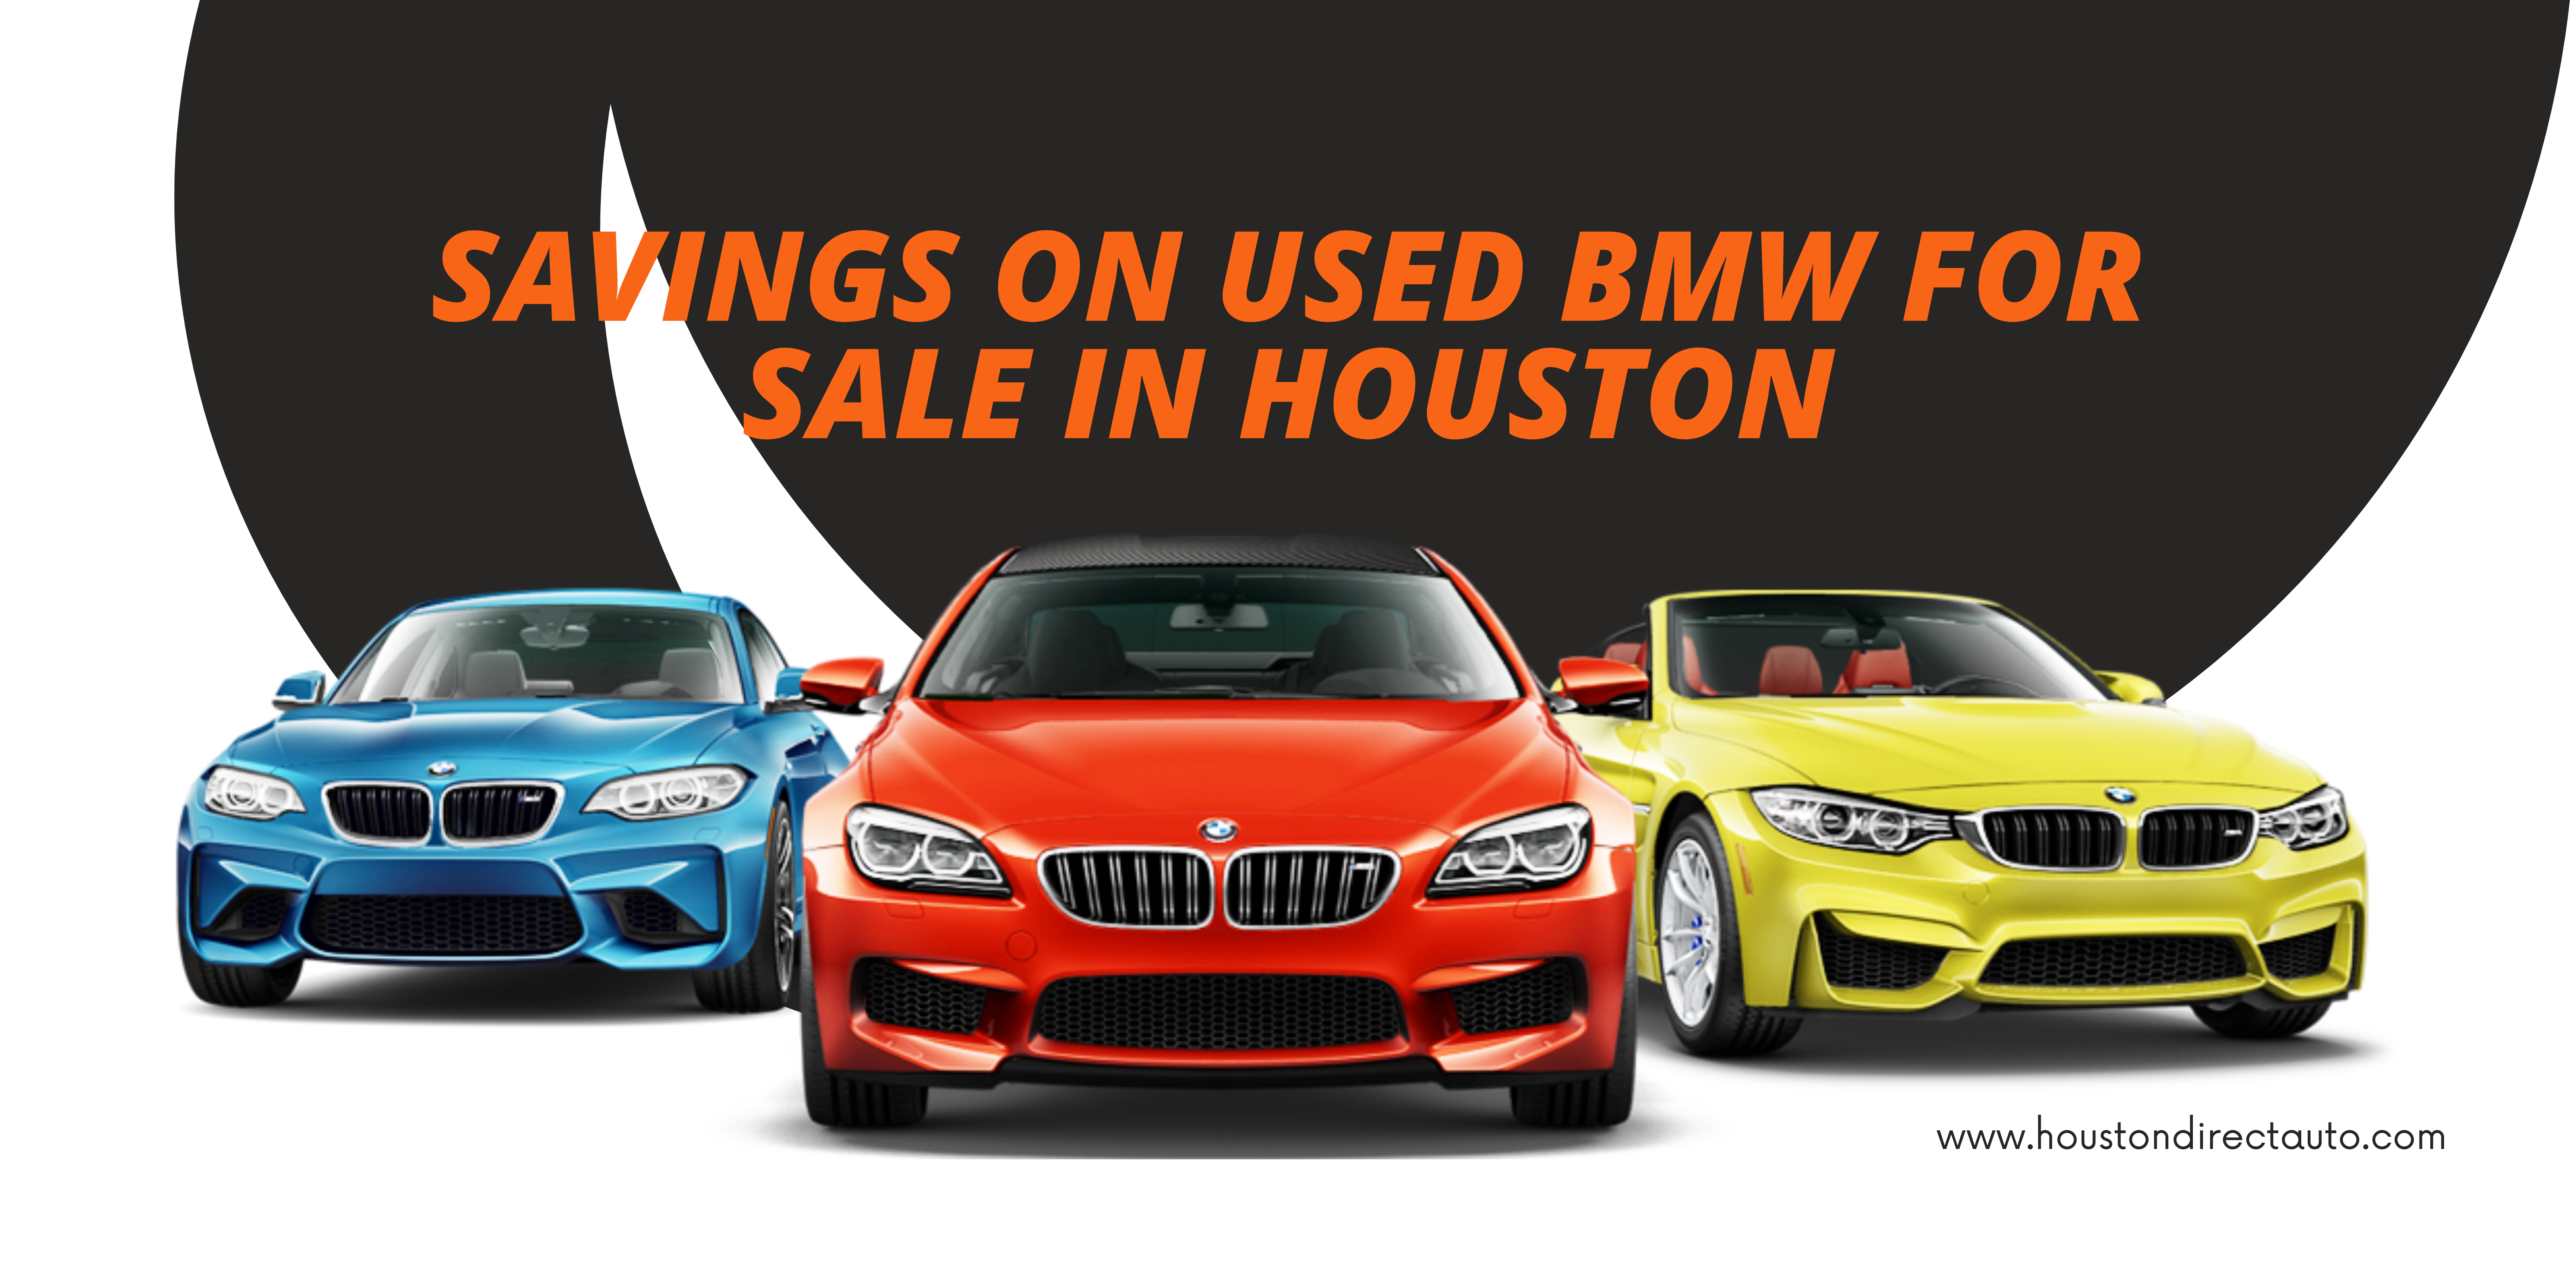 certified used bmw in houston tx, bmw cars for sale in houston tx, used bmw for sale in houston tx